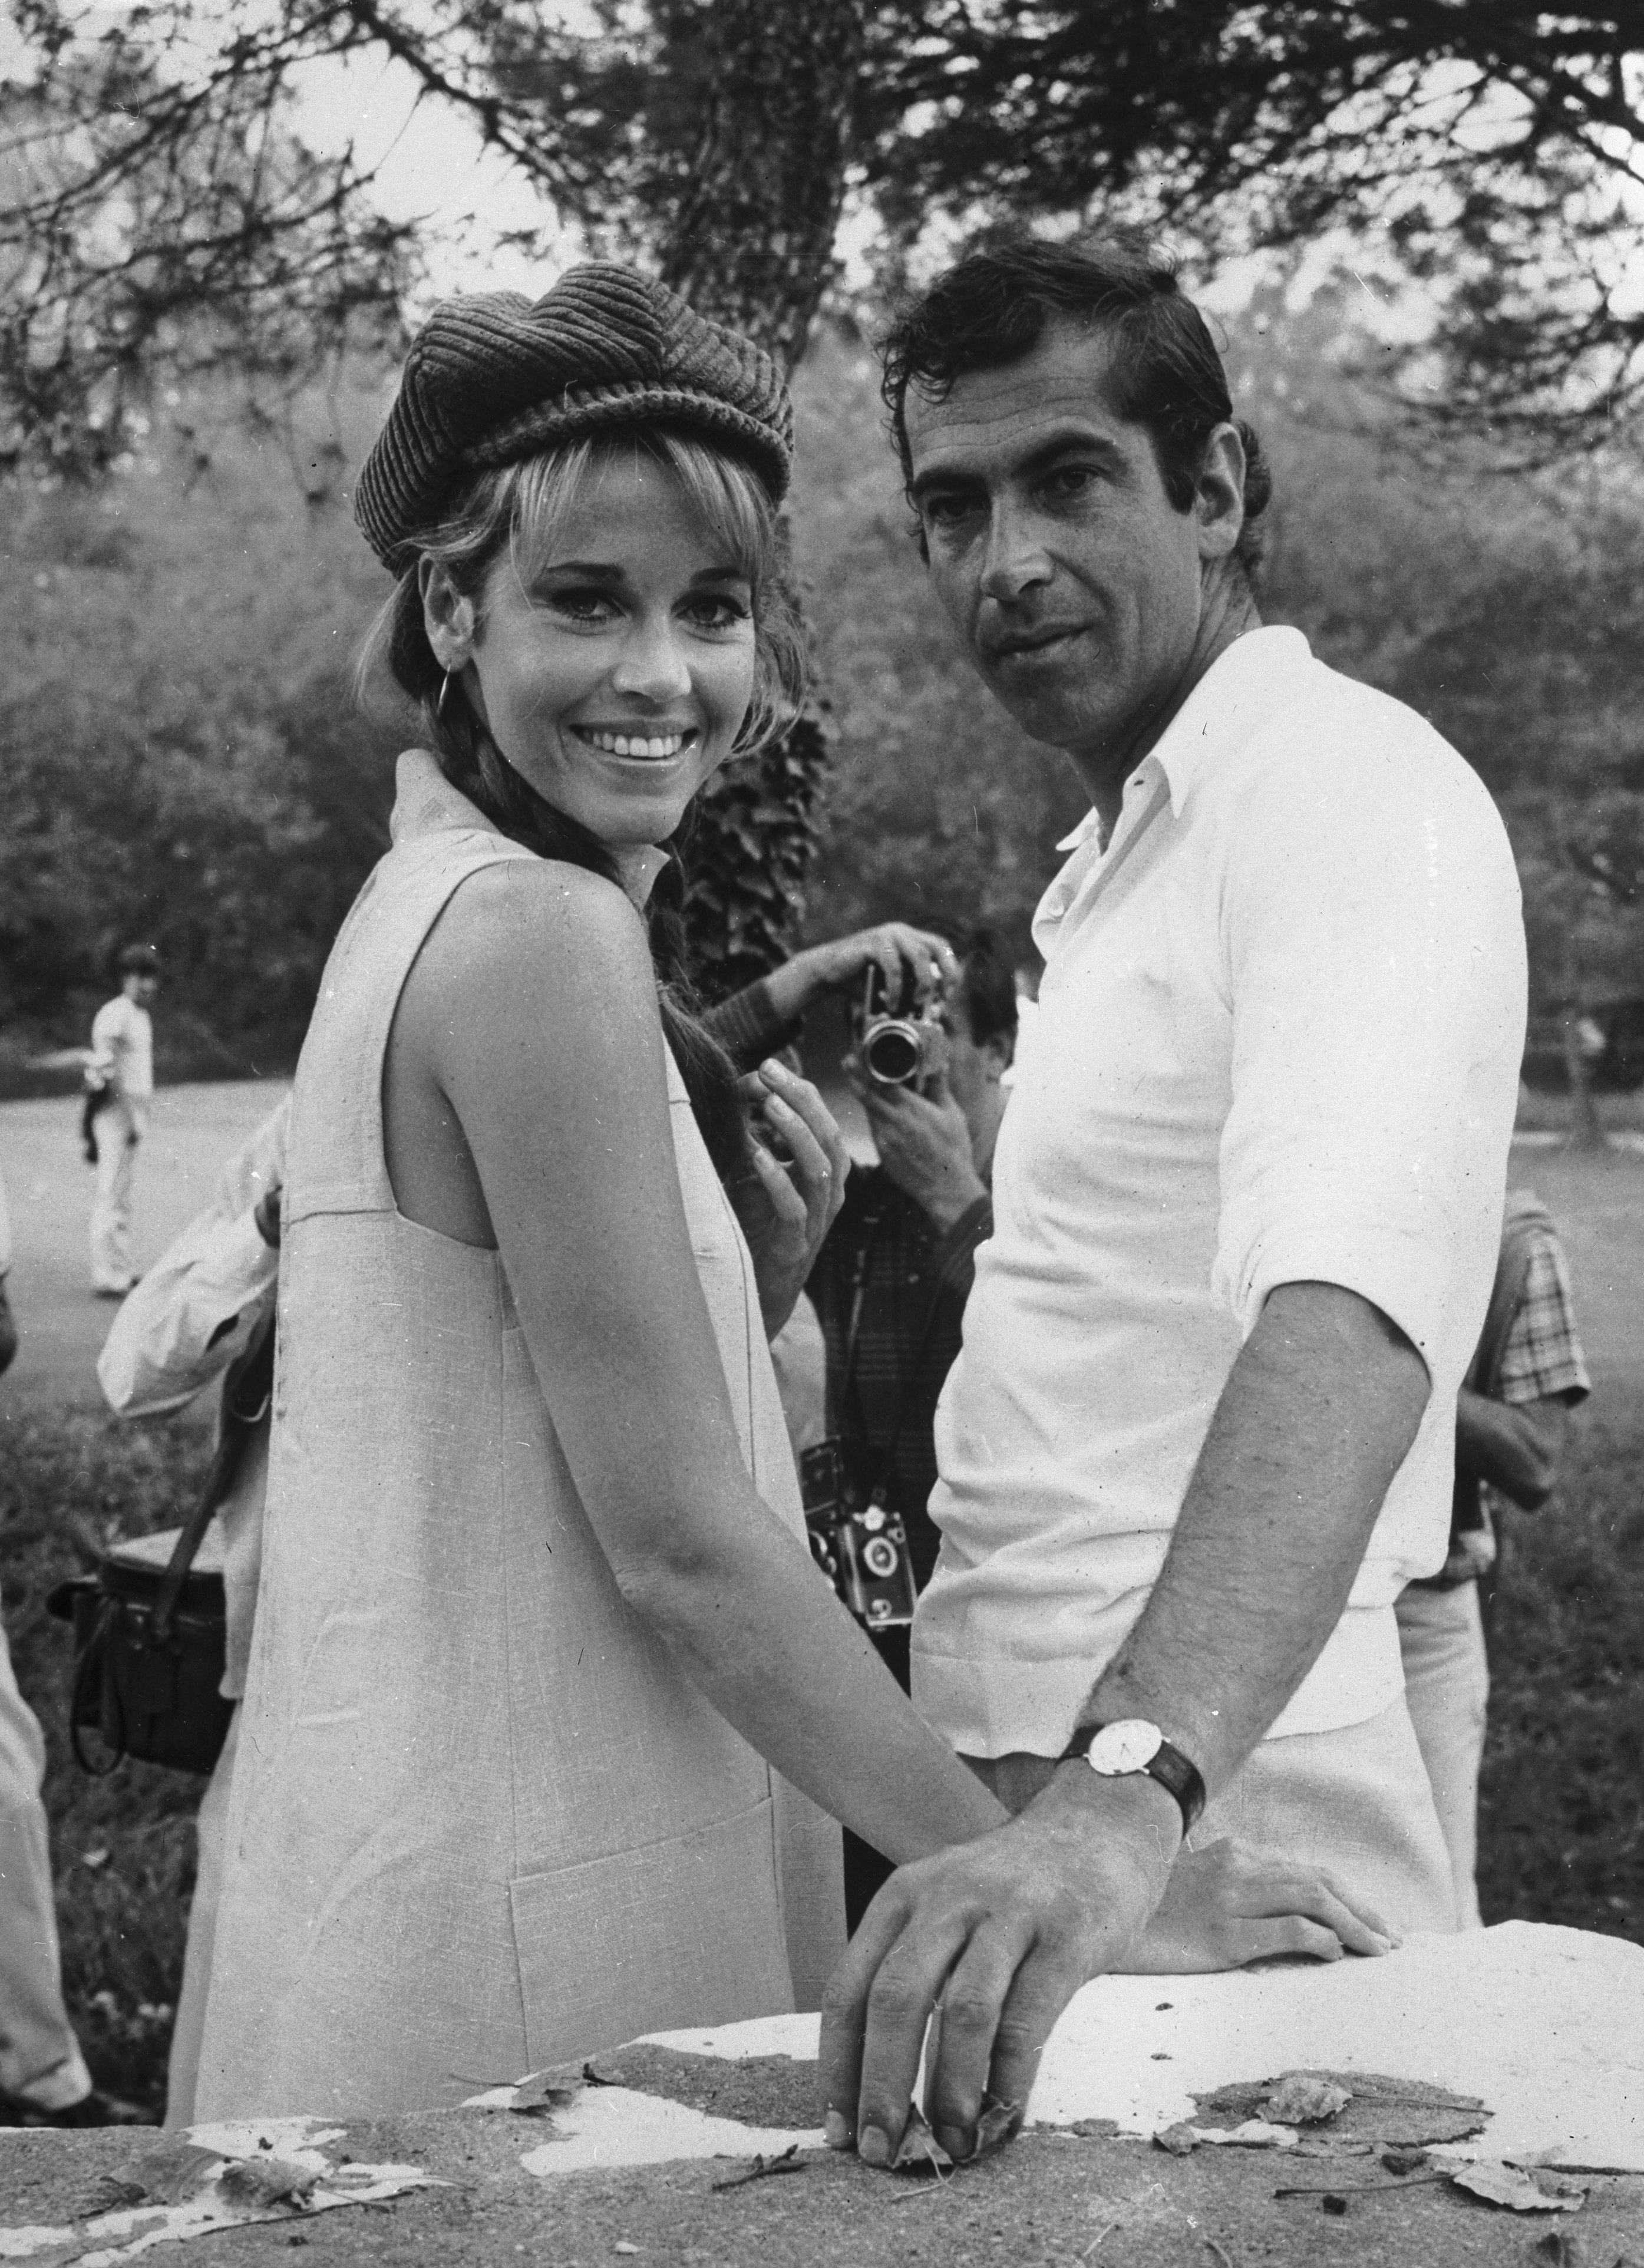 American actress Jane Fonda with her husband, the French film director Roger Vadim in 1966. | Source: Getty Images